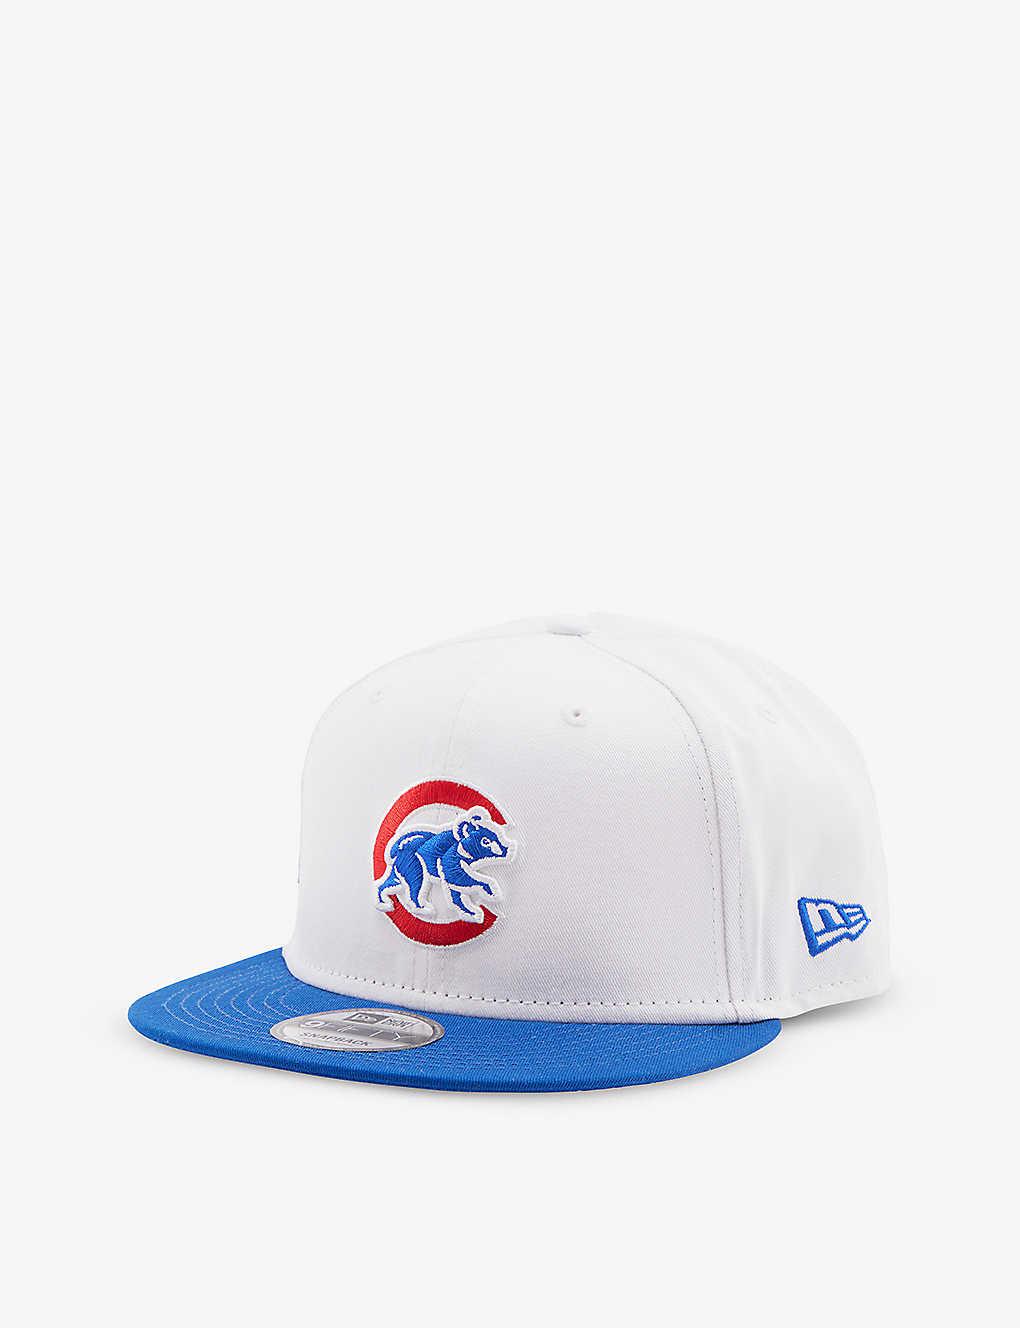 White New Era MLB Chicago Cubs Pastel Patch 9FIFTY Cap